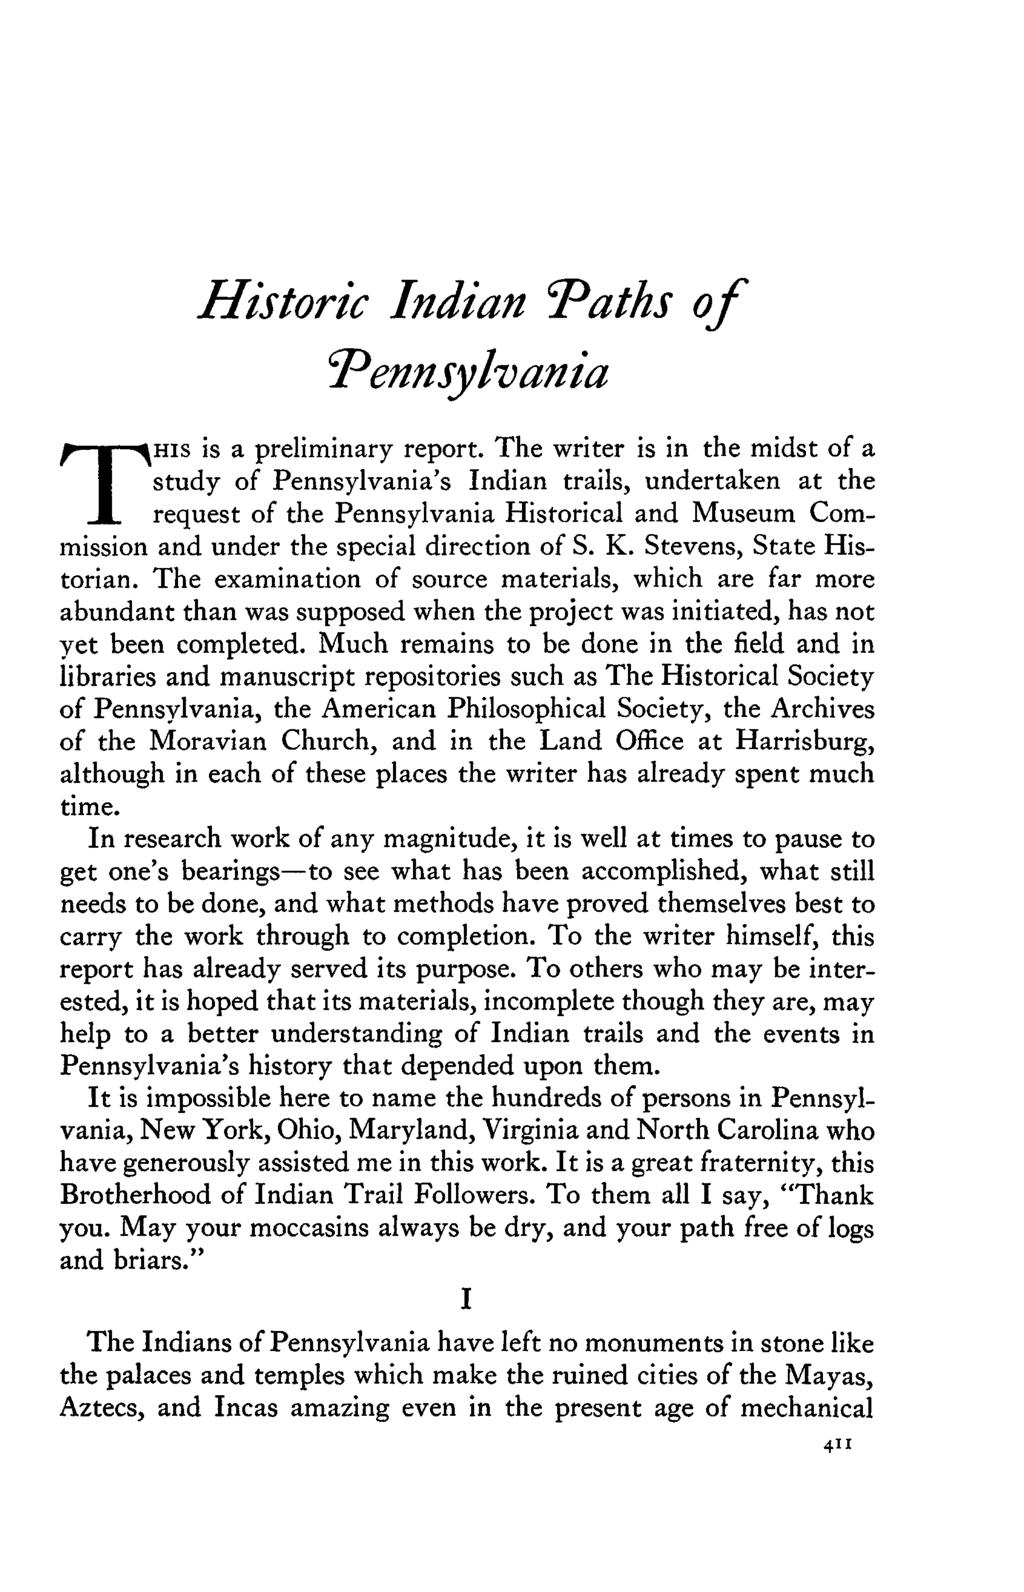 Historic Indian "Paths of Pennsylvania THIS is a preliminary report.